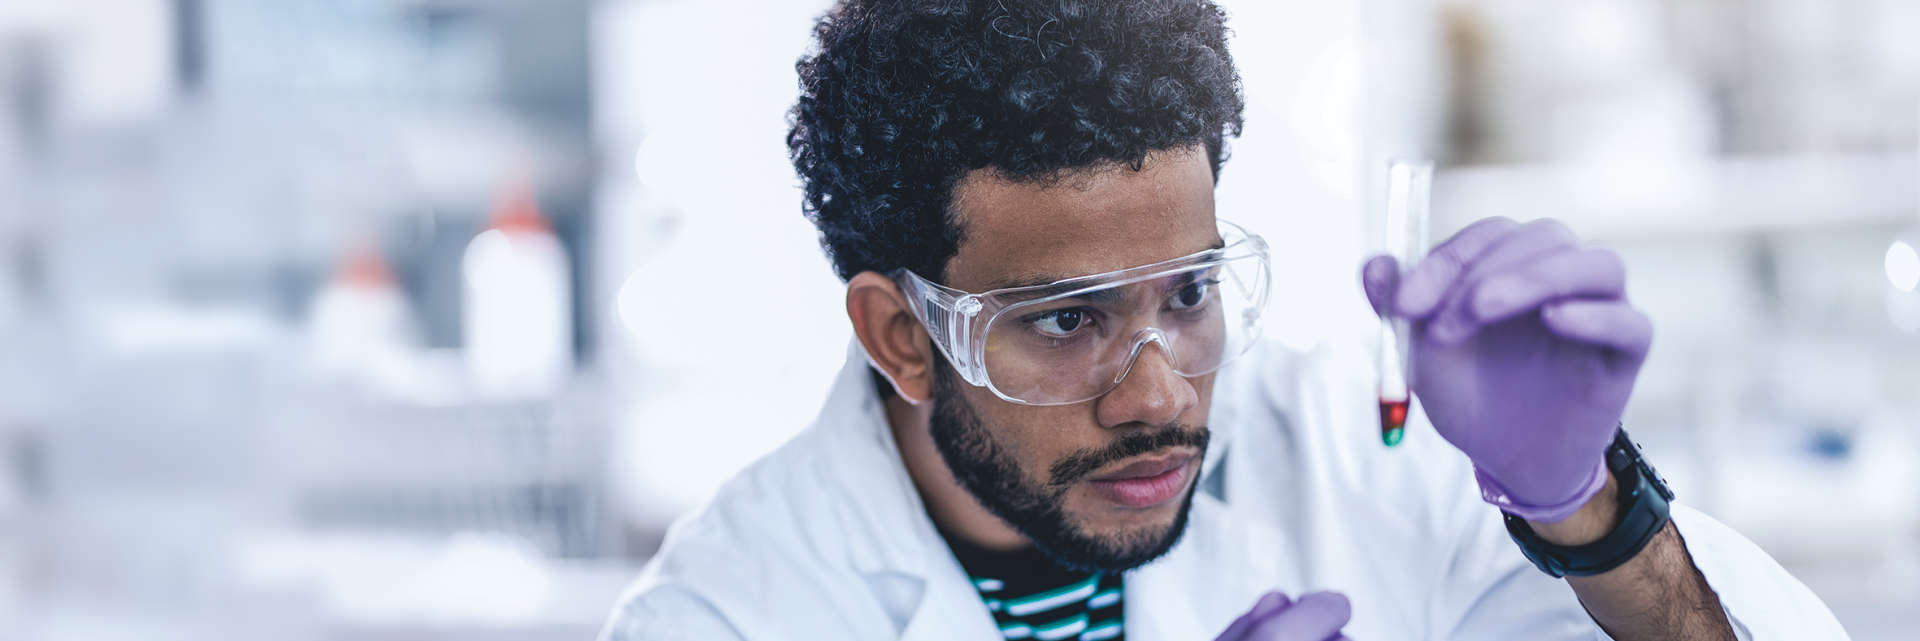 Enzymes, NGS, Black male scientist looking at test-tube filled with substance in a laboratory setting